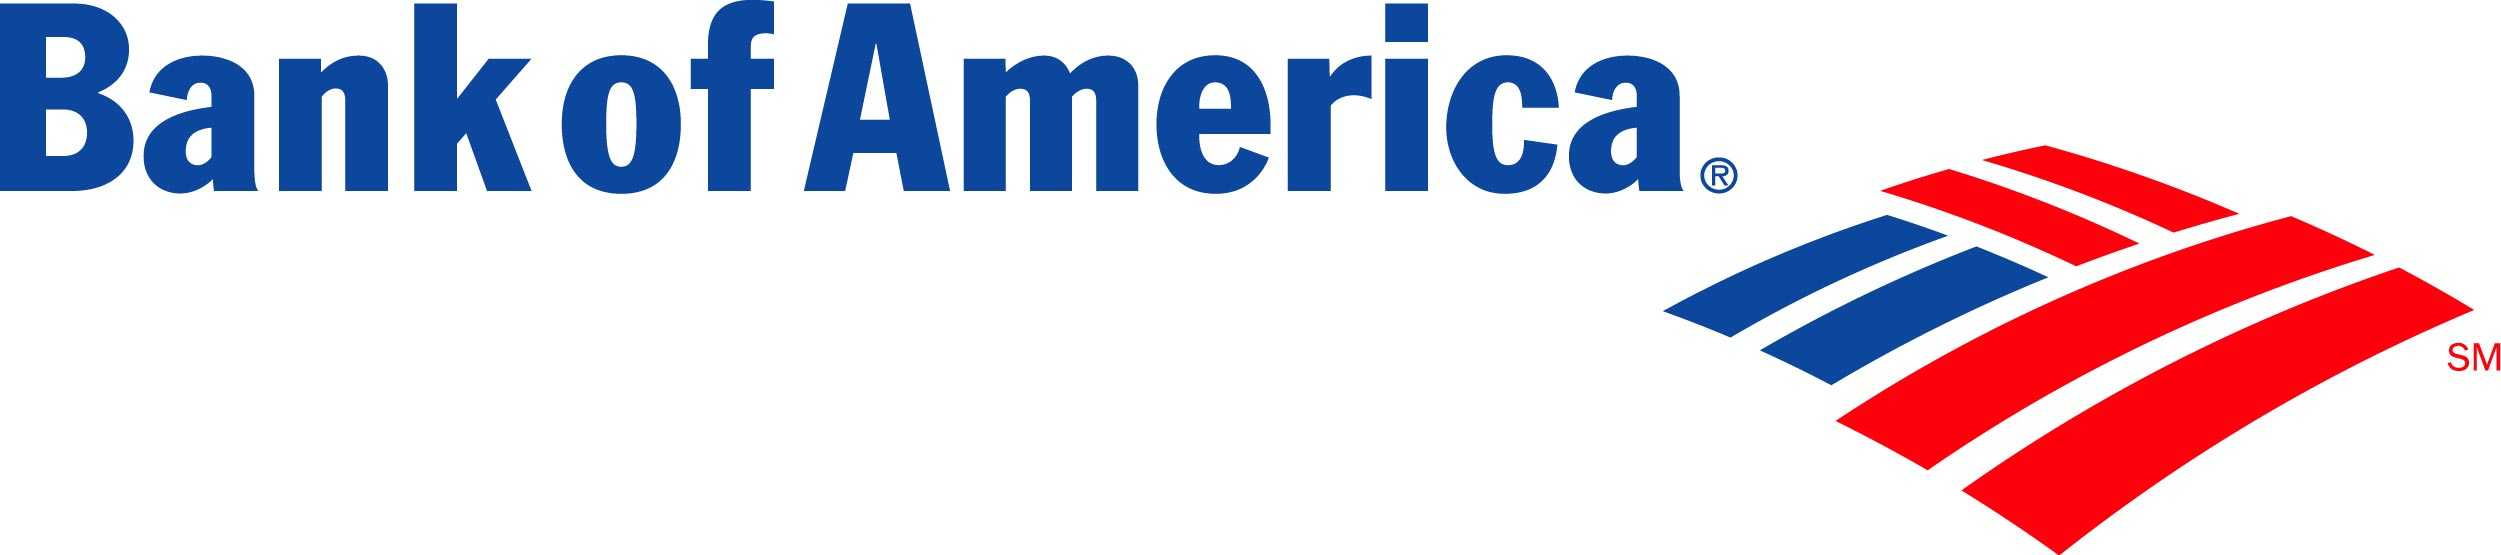 Bank of America Check Logo - UPDATE: Bank of America Becomes Fourth Company to Pull Advertising ...